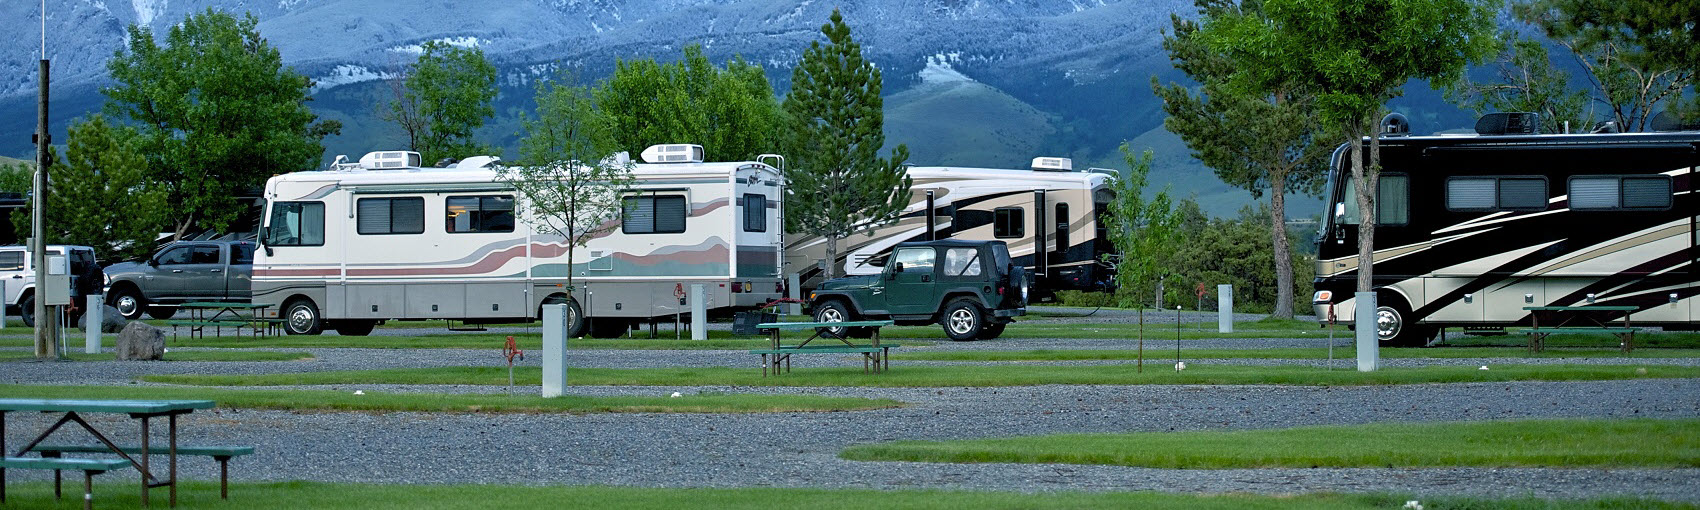 Best Places to RV Virginia